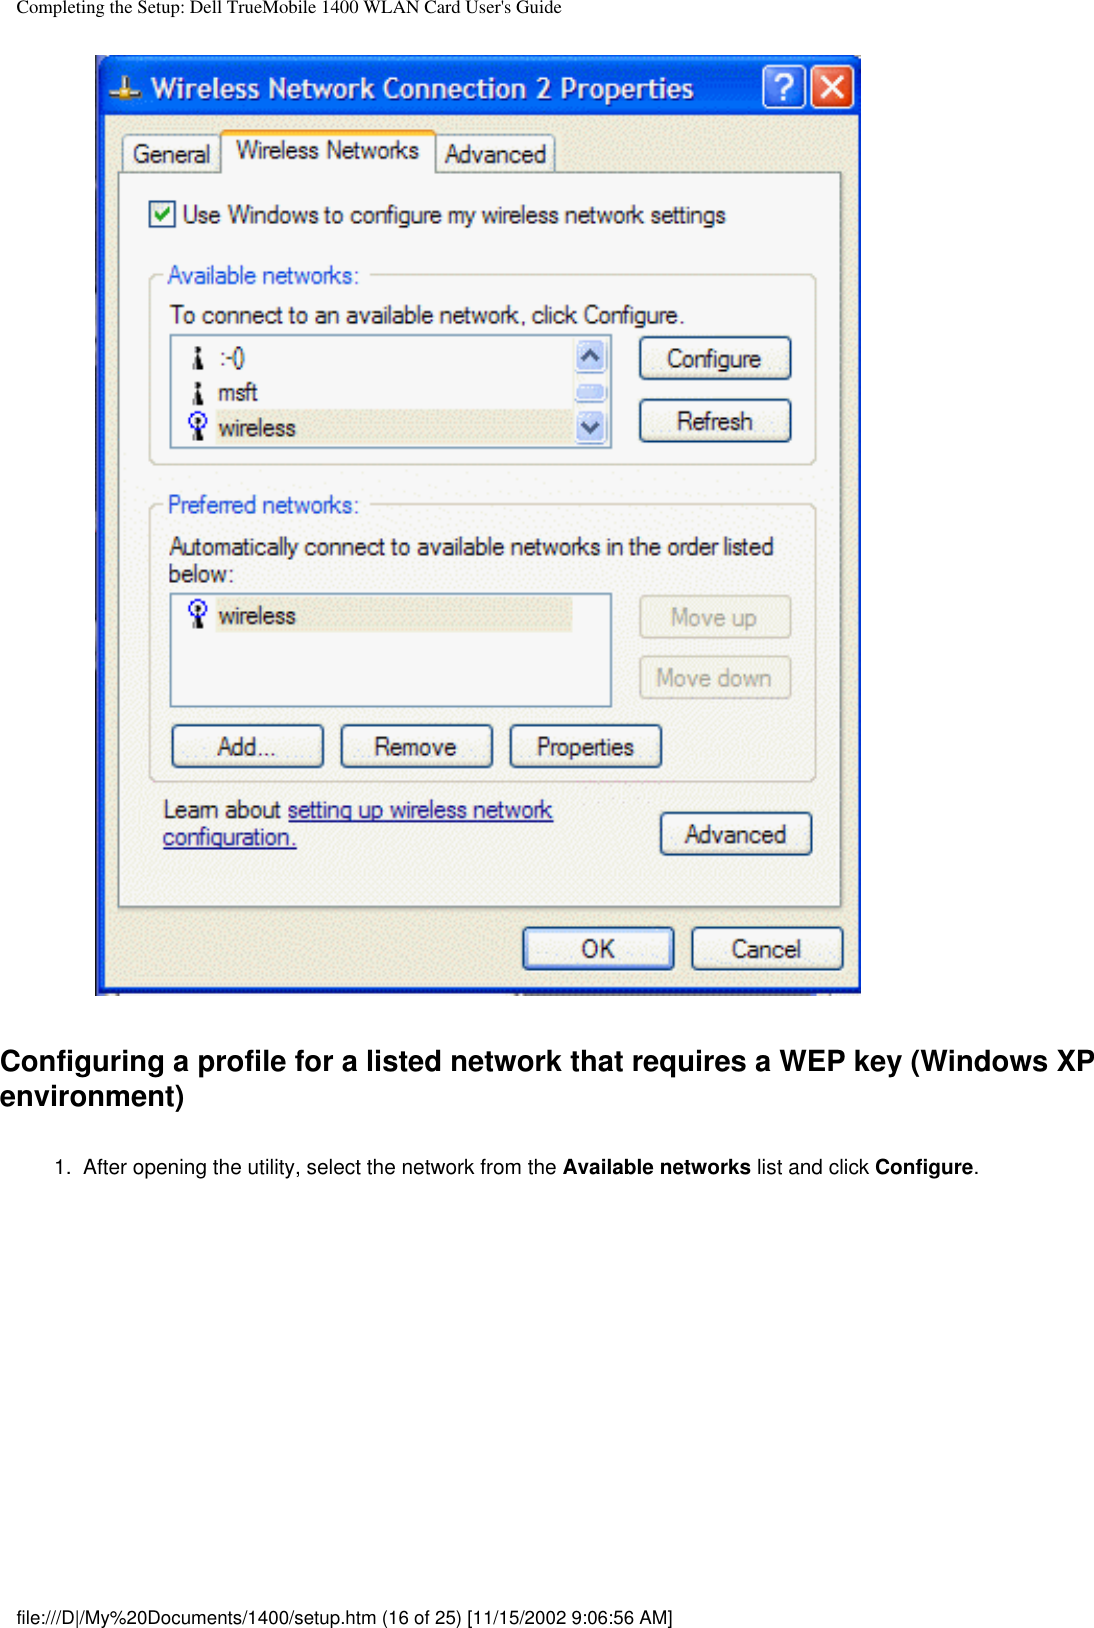 Completing the Setup: Dell TrueMobile 1400 WLAN Card User&apos;s GuideConfiguring a profile for a listed network that requires a WEP key (Windows XP environment)1.  After opening the utility, select the network from the Available networks list and click Configure. file:///D|/My%20Documents/1400/setup.htm (16 of 25) [11/15/2002 9:06:56 AM]